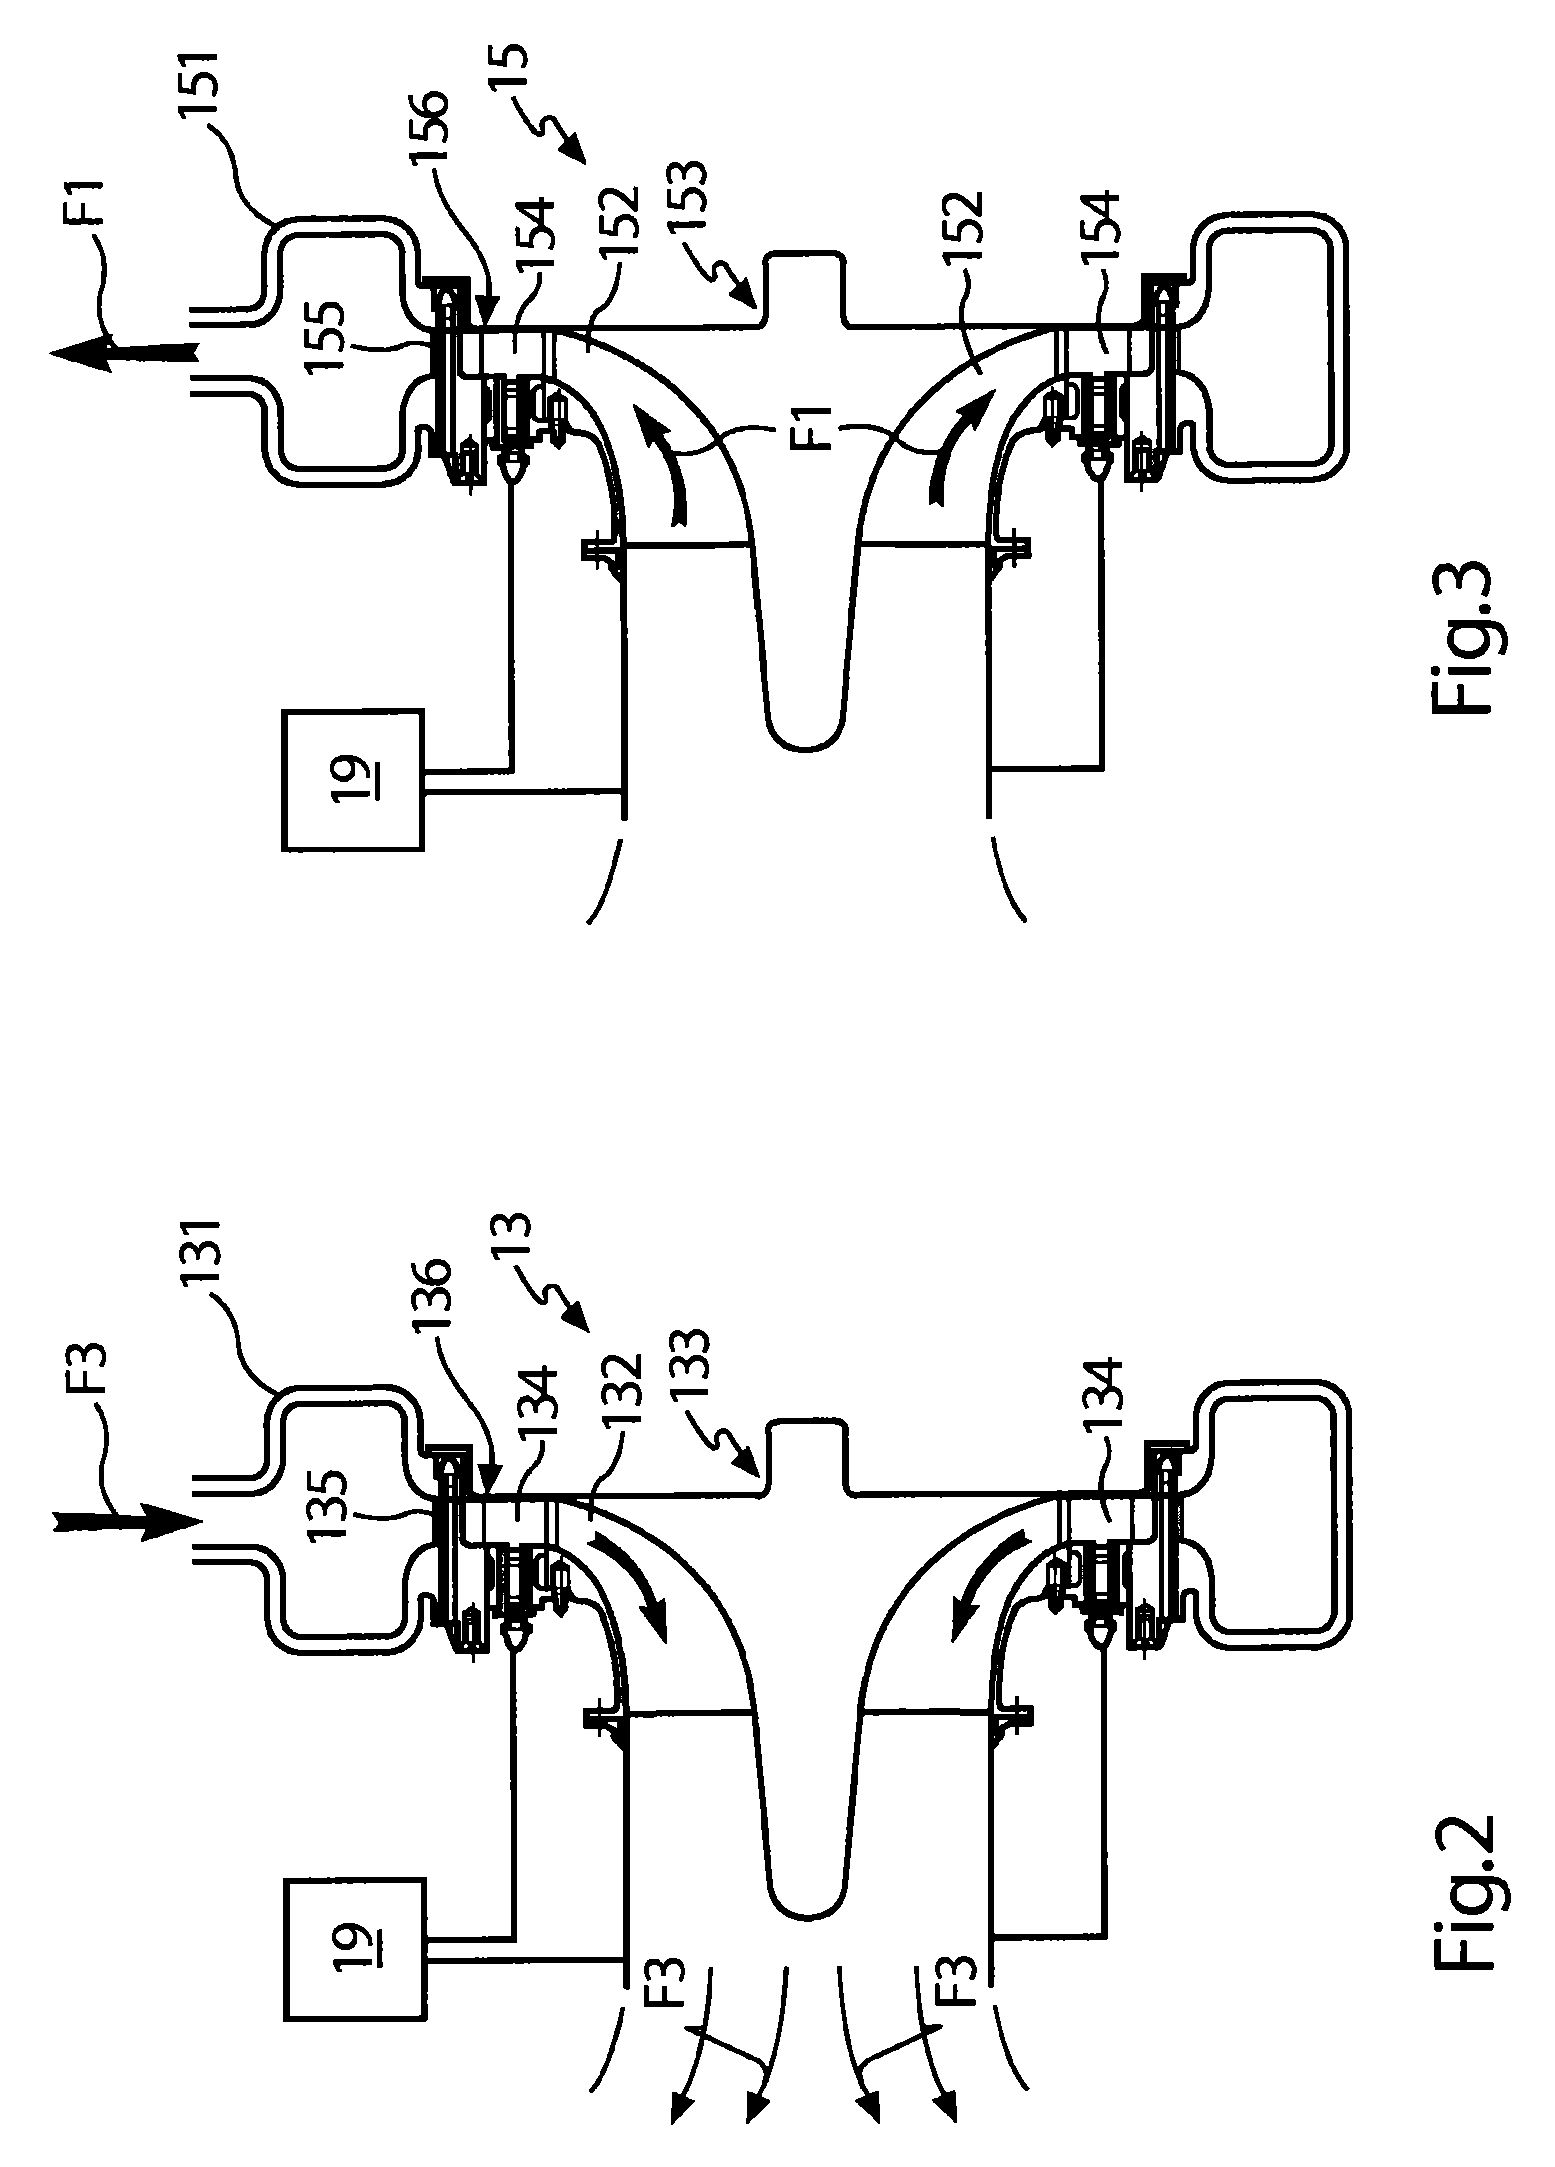 Method for optimizing the overall energy efficiency of an aircraft, and main power package for implementing same